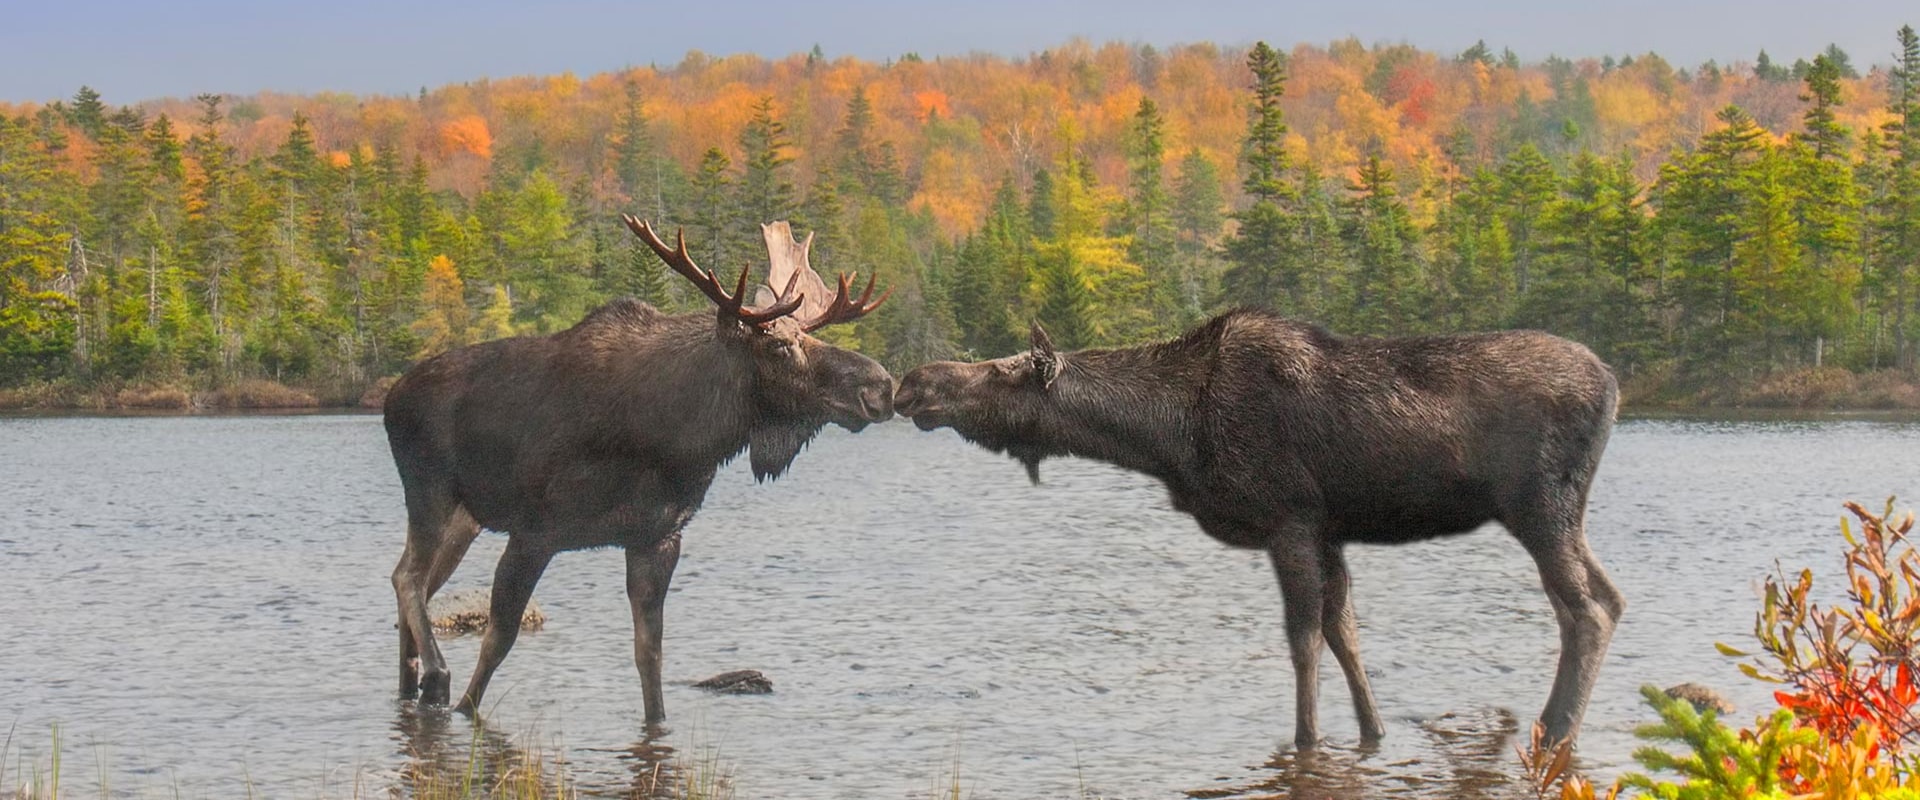 Protecting Canada's Wildlife: The Goals of Canadian Wildlife Campaigns